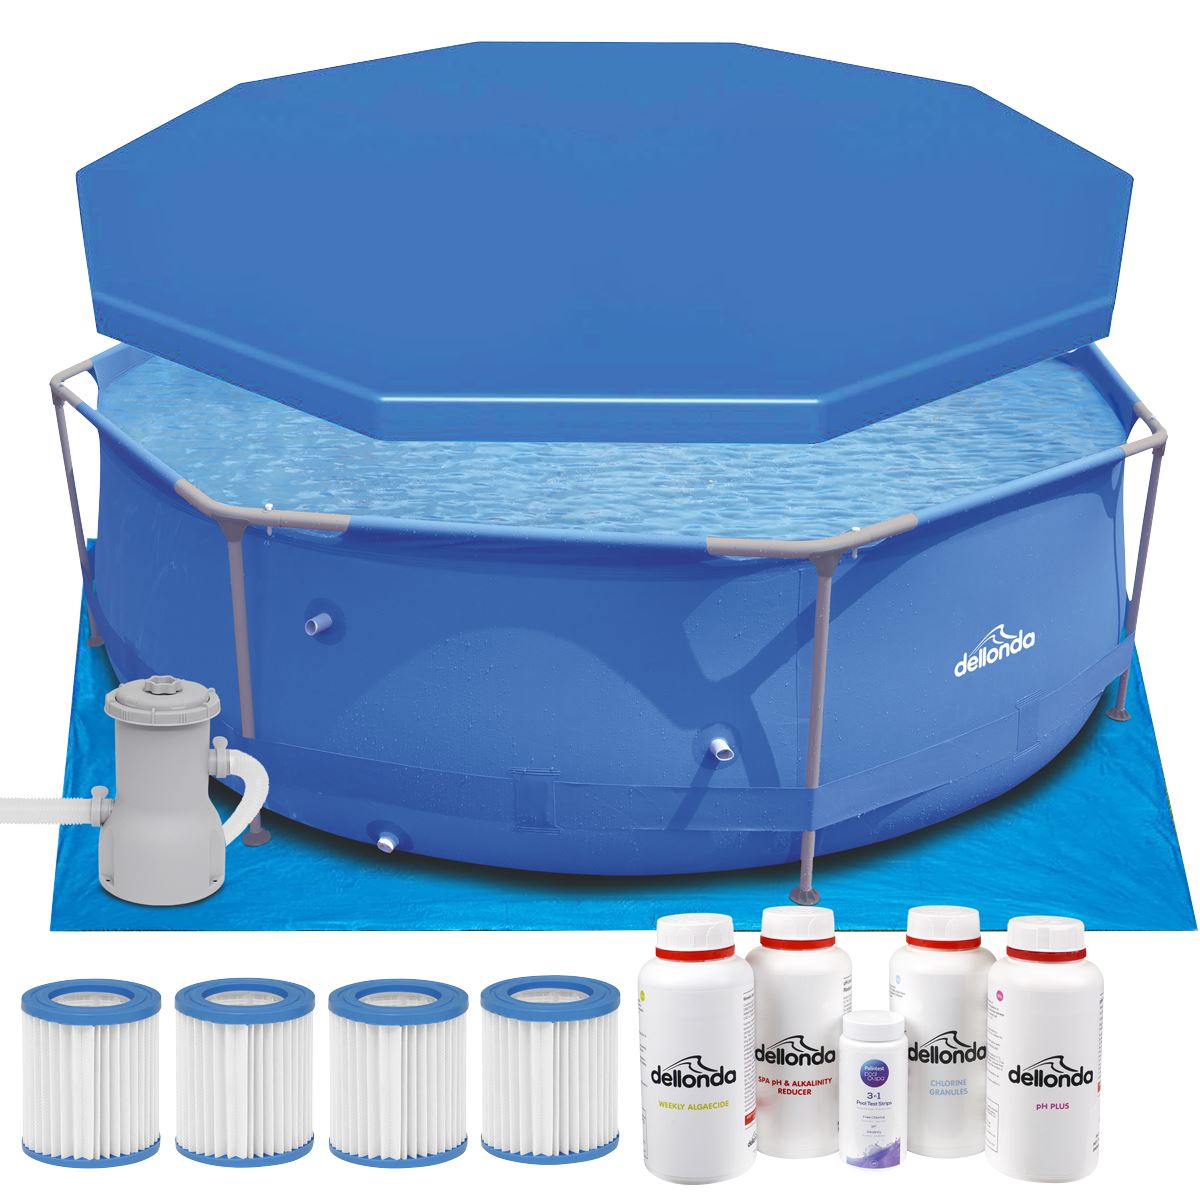 Dellonda 10ft Steel Frame Swimming Pool Round with Accessories, Blue